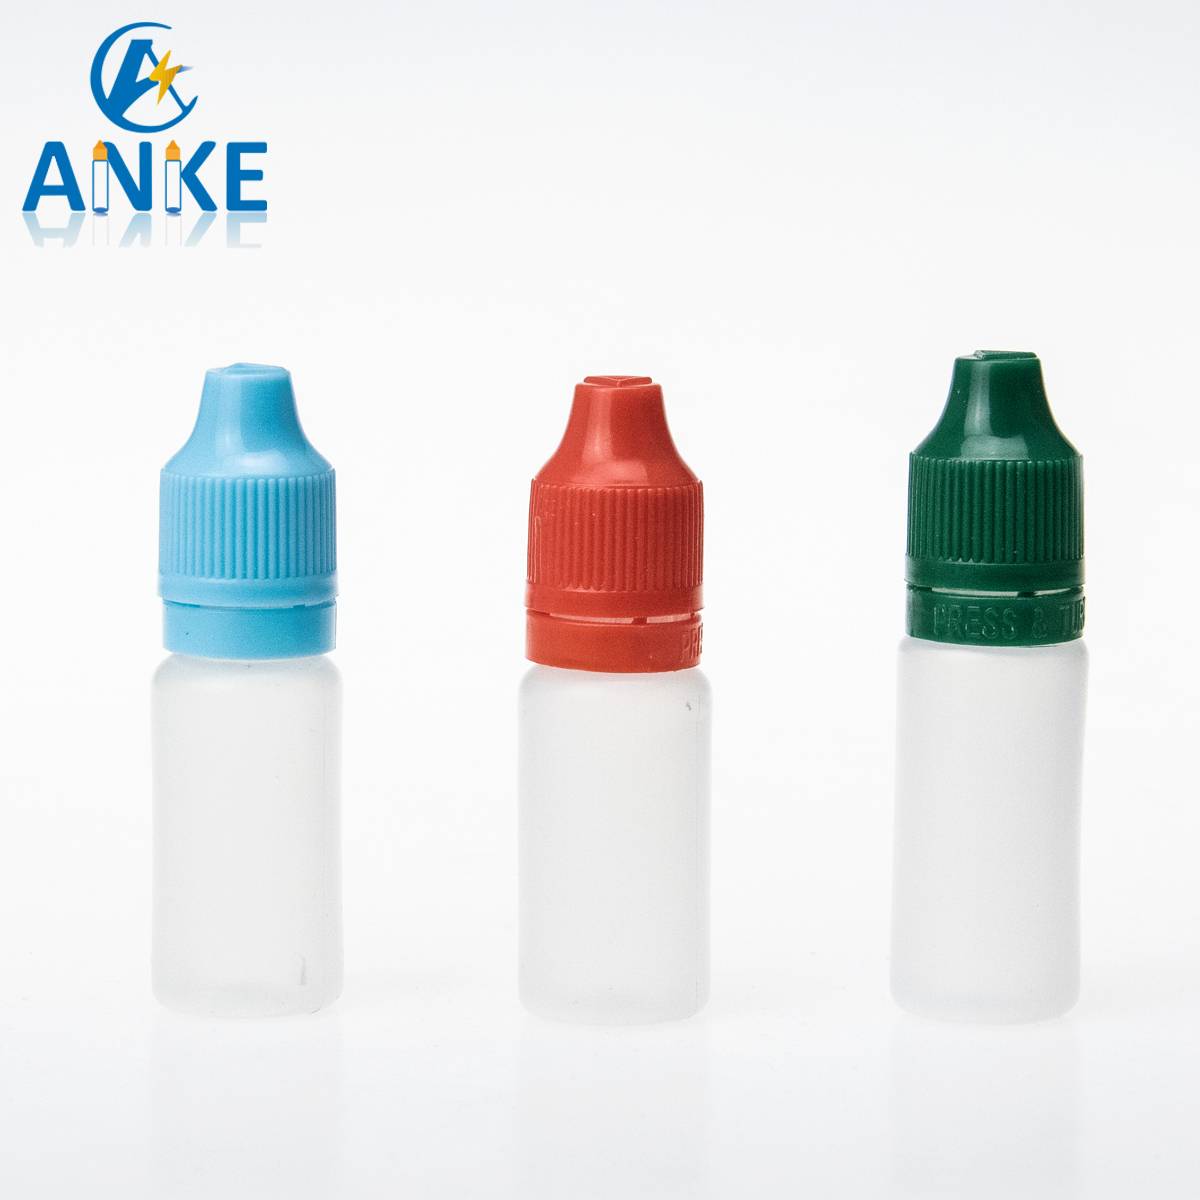 10ml PE E liqud Bottle with childproof tamper cap